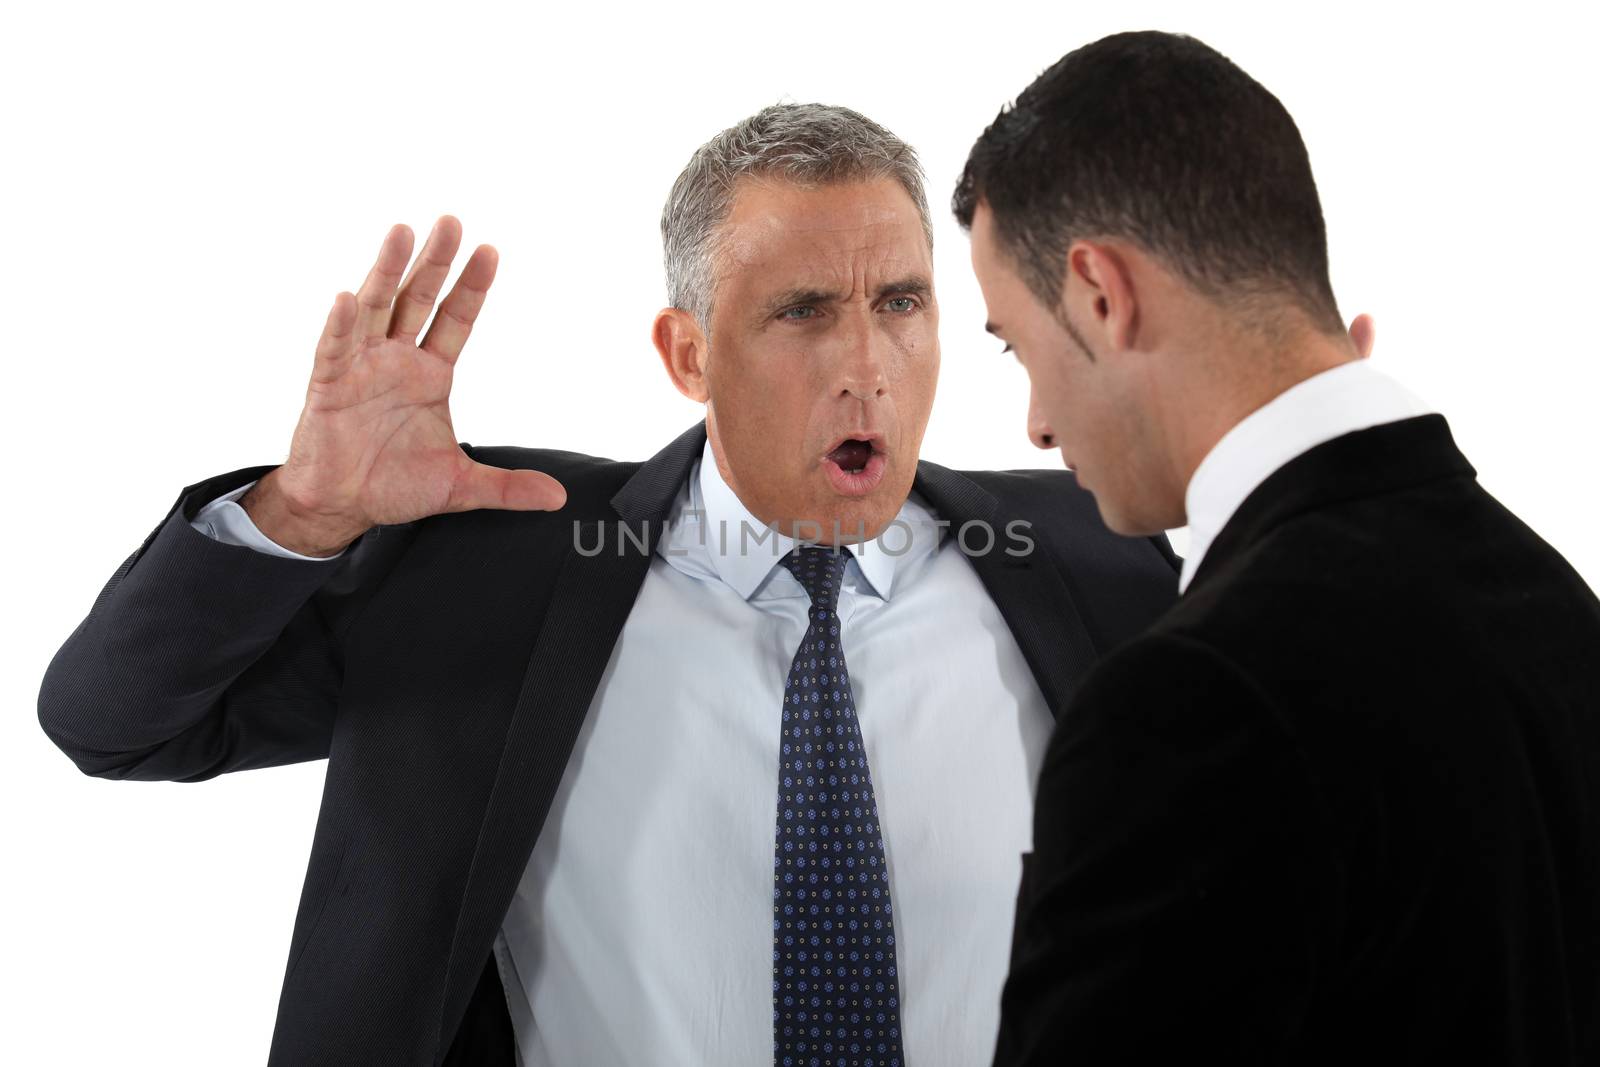 Boss shouting at employee by phovoir